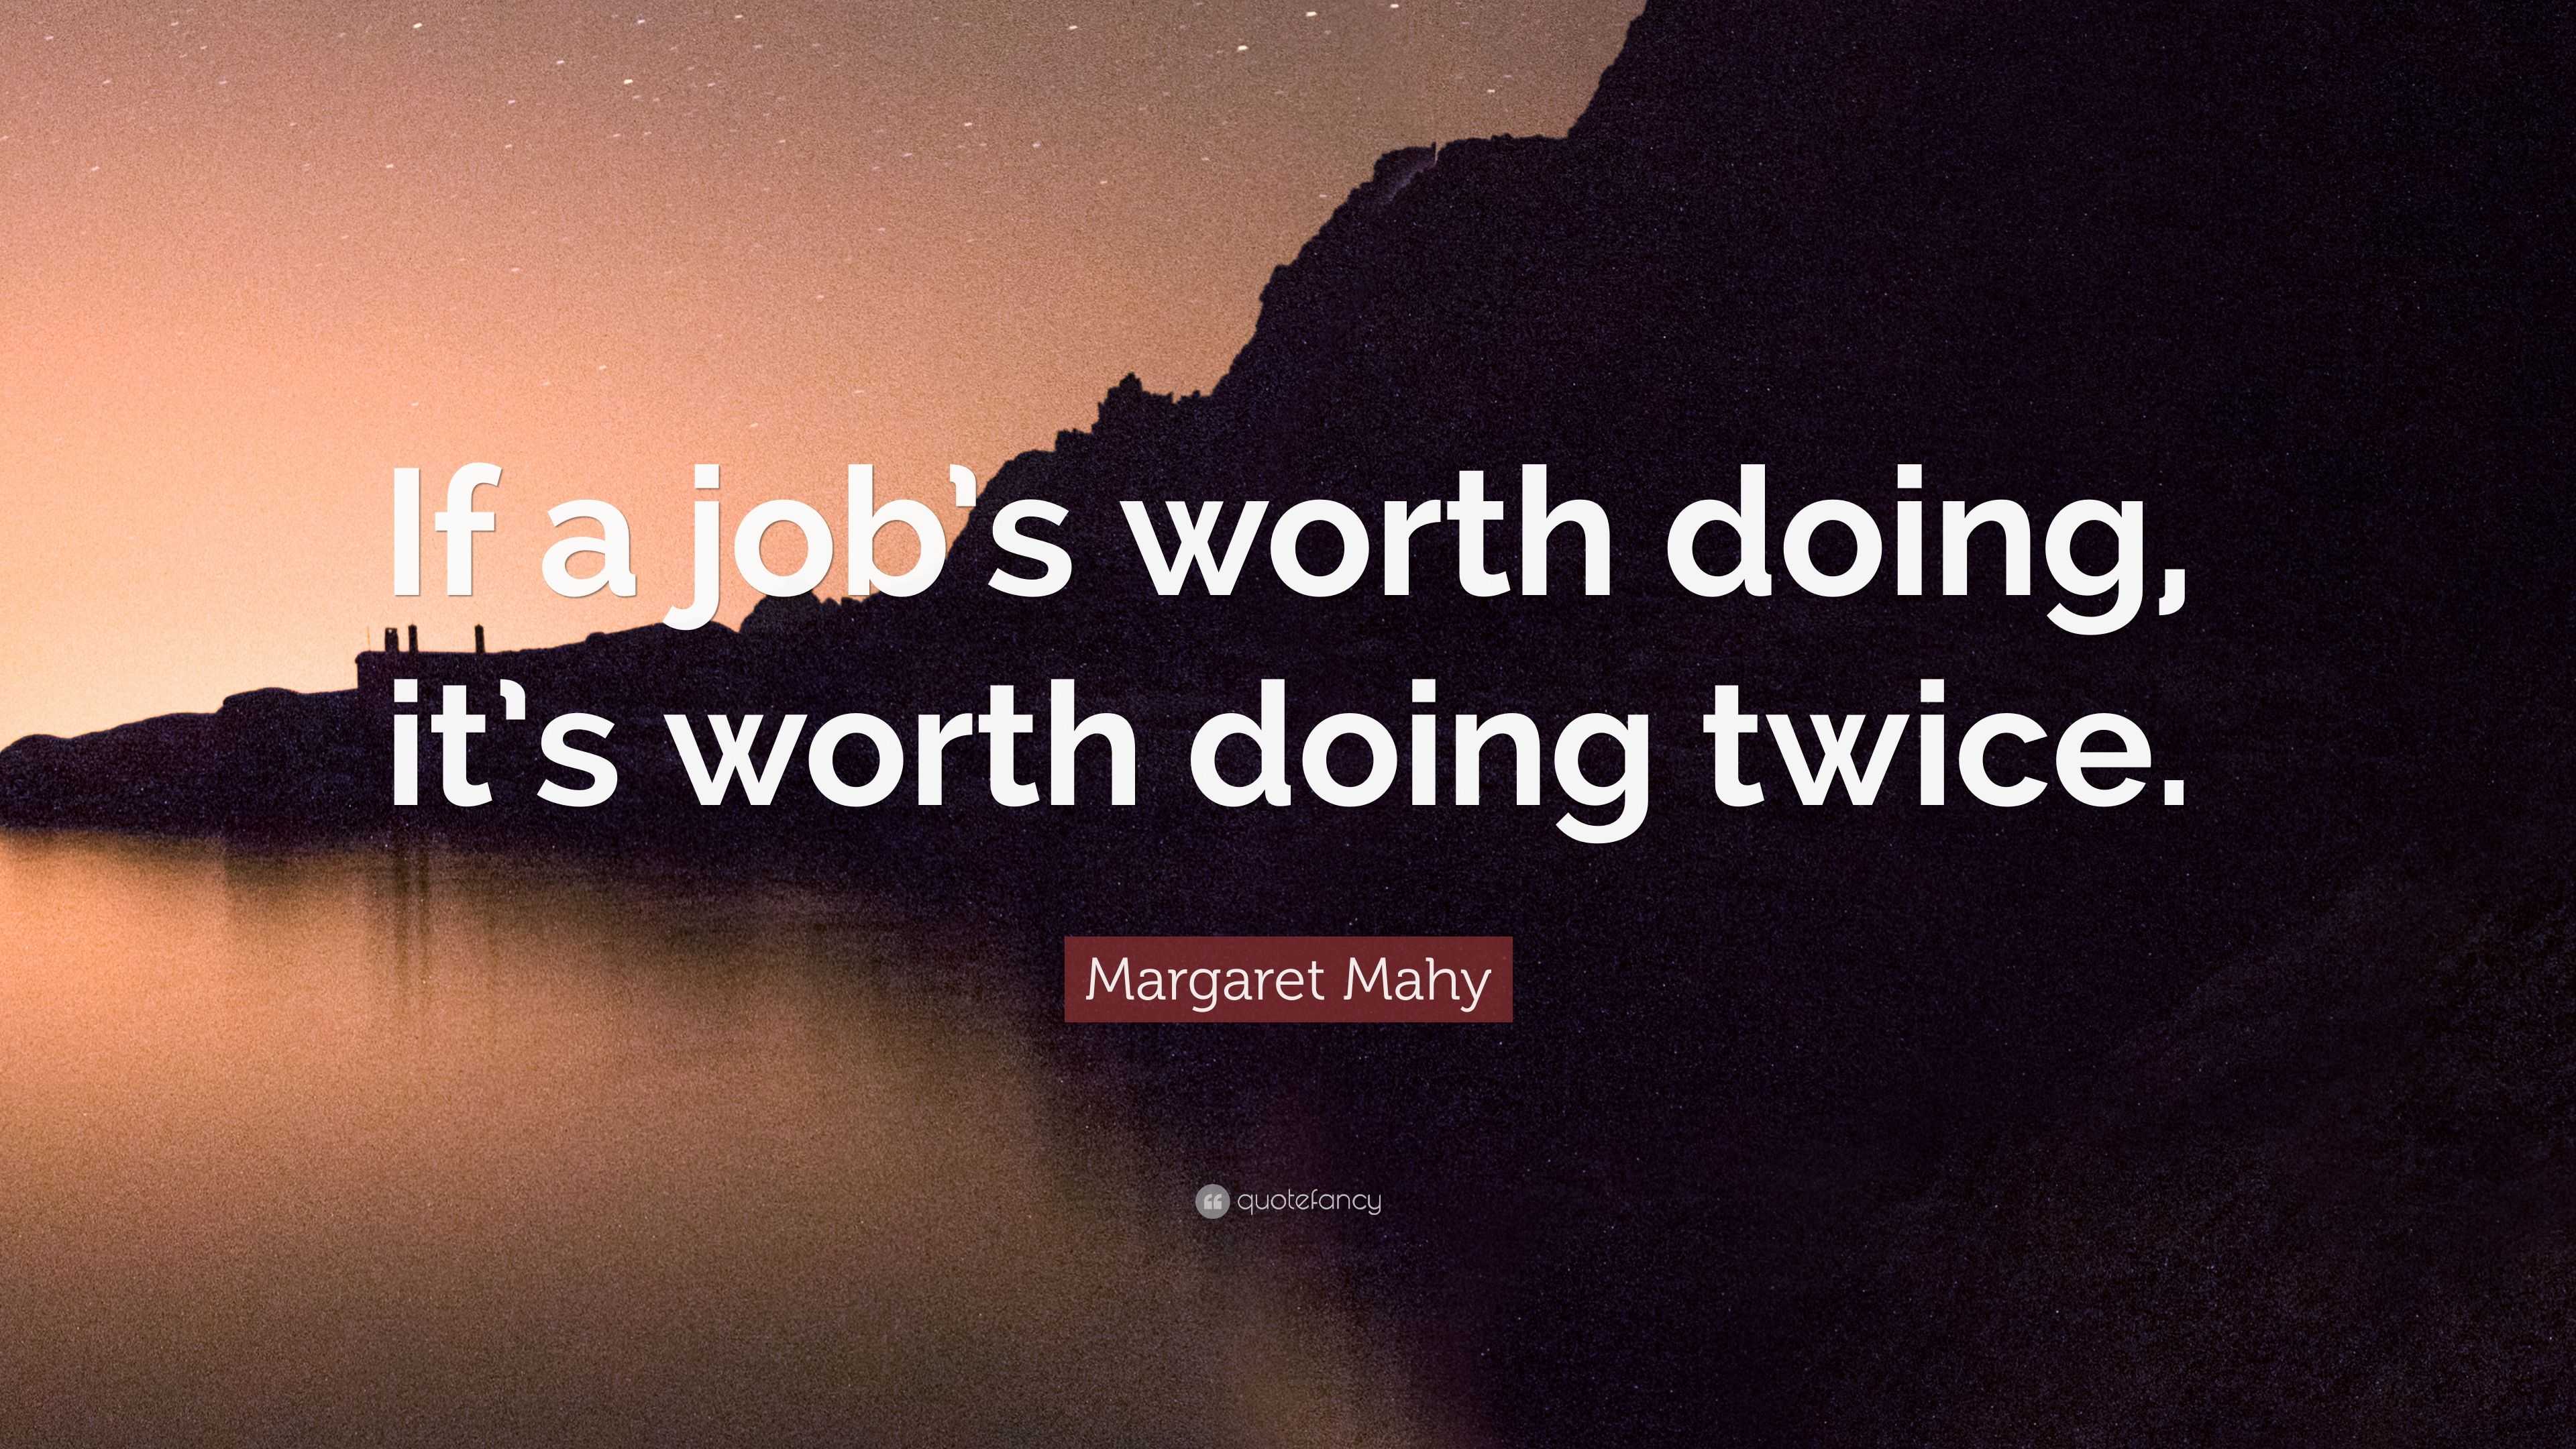 Margaret Mahy Quote “If a job’s worth doing, it’s worth doing twice.”